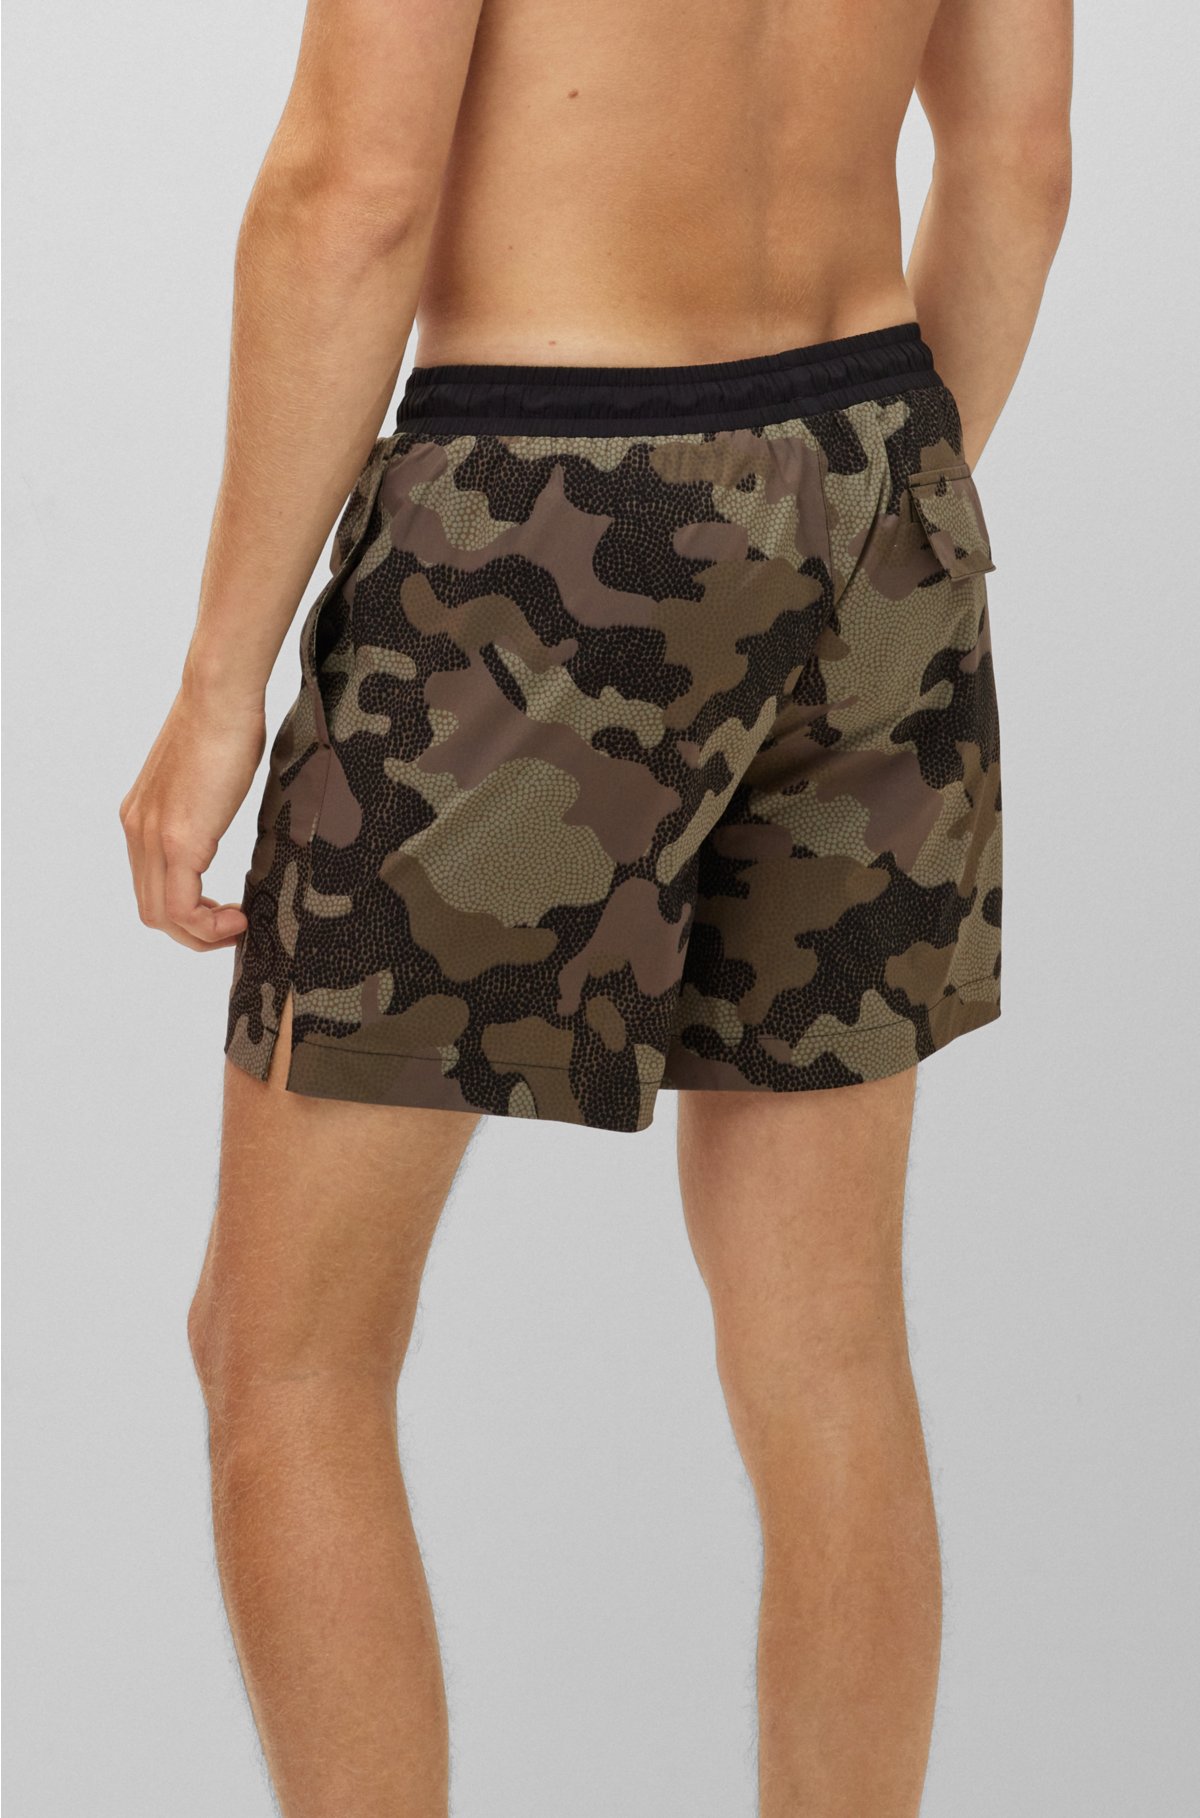 Boss & NBA Quick-drying Swim Shorts in camouflage-print Recycled Fabric - Green - Small